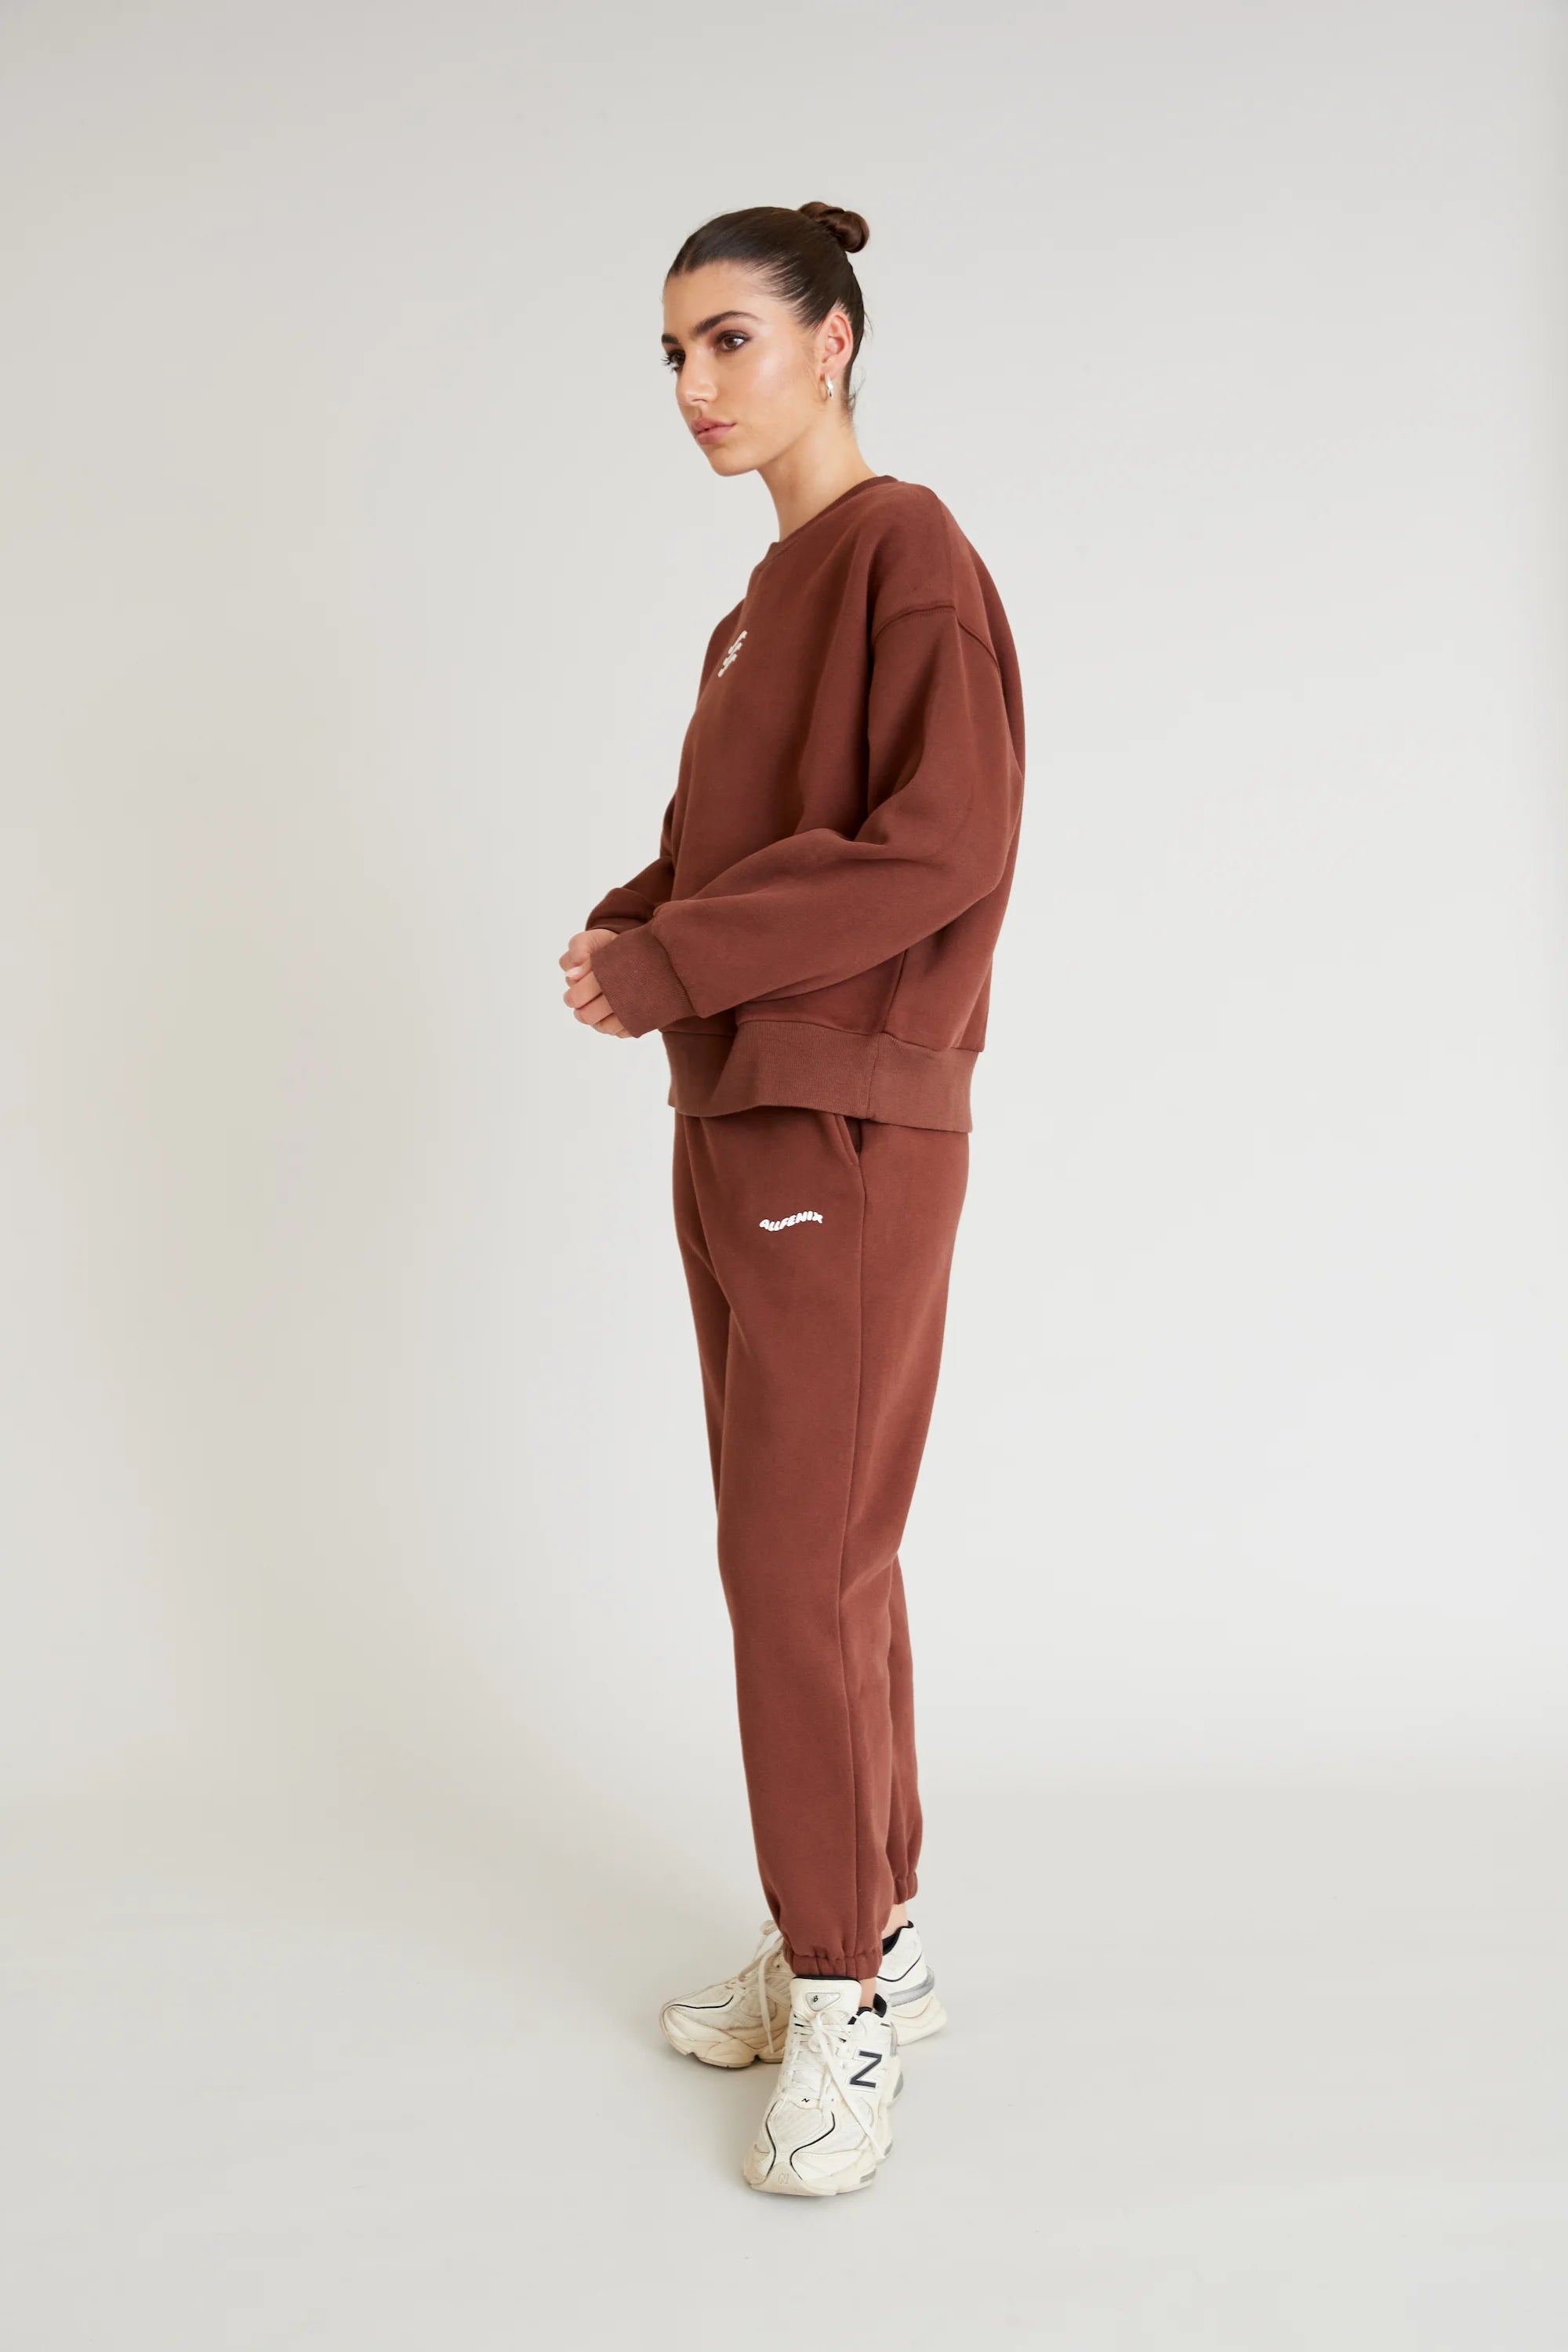 All Sport 3.0 Track Pant (Chocolate) - All Fenix